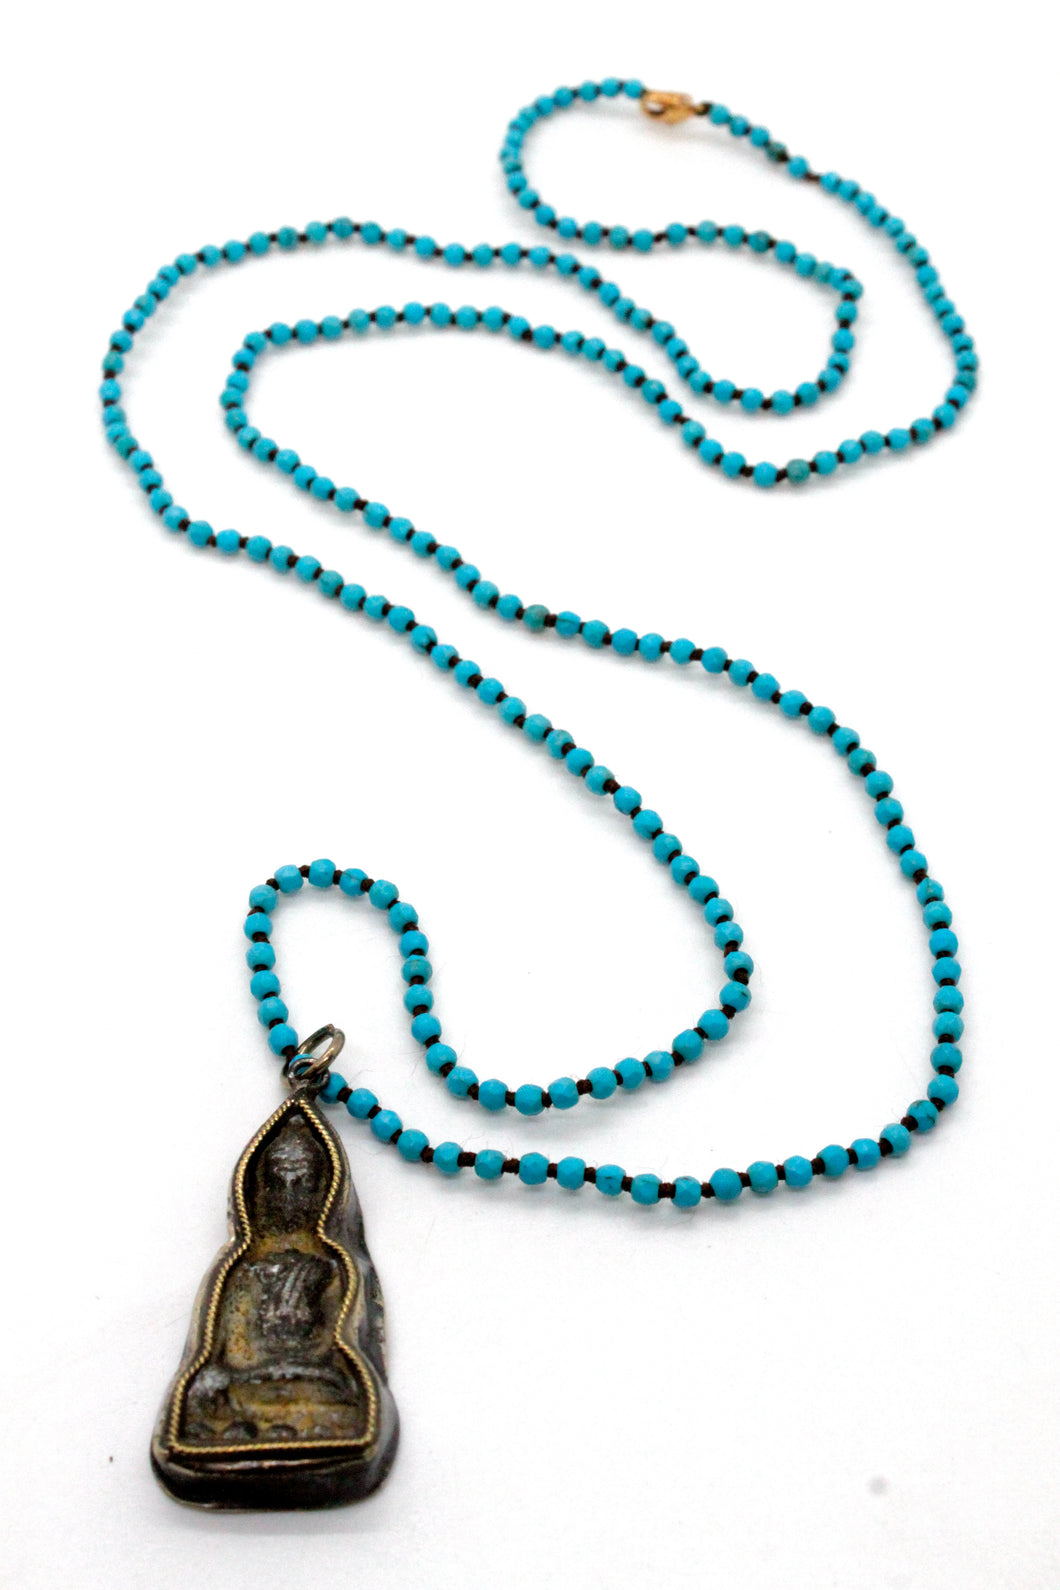 Turquoise Hand Knotted Long Necklace with Large Buddha Charm NL-sTQ-B161 -The Buddha Collection-